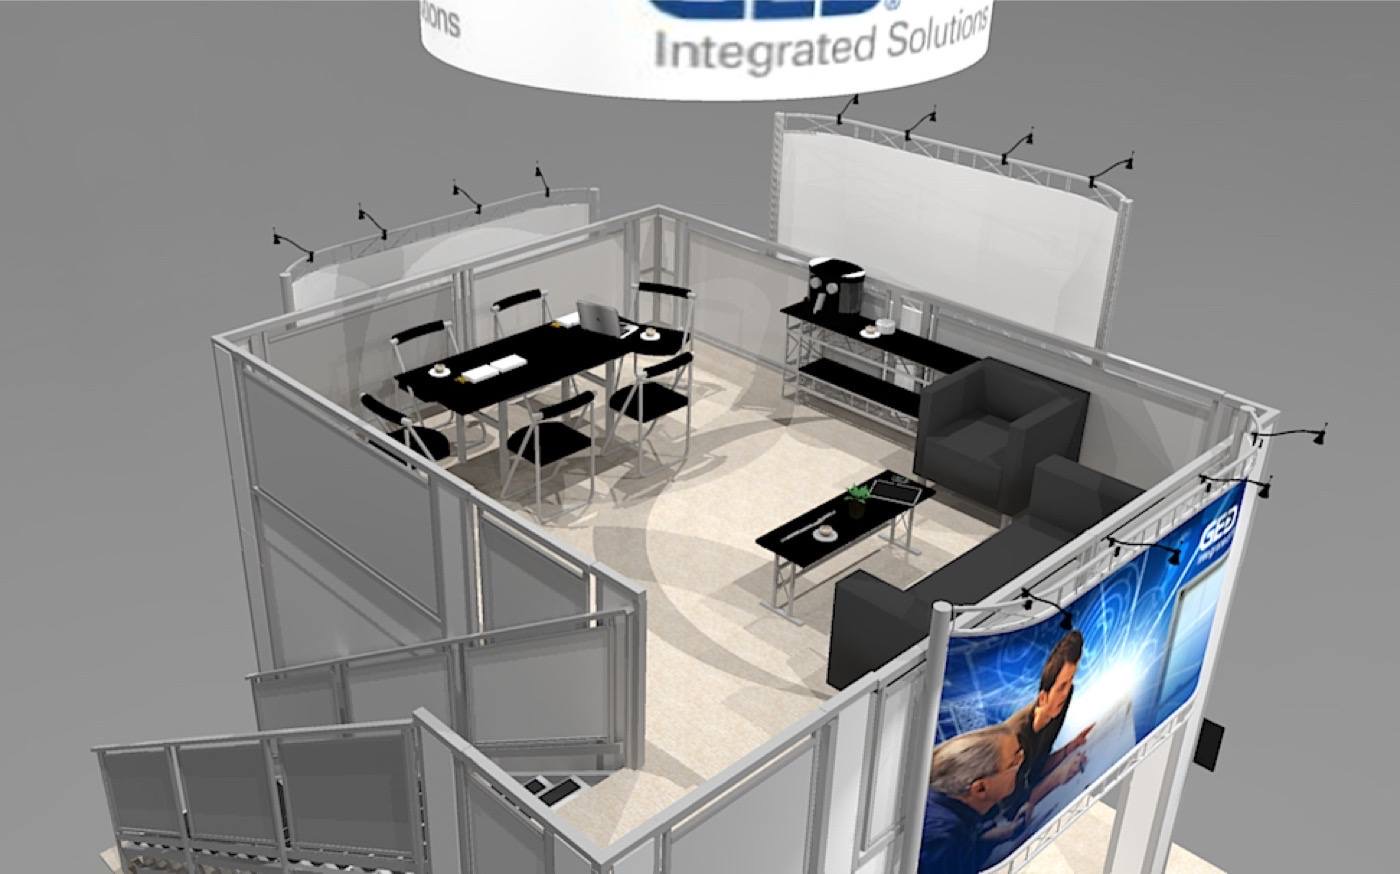 trade show rental design for 20 ft. Island trade show booth space showing top floor view